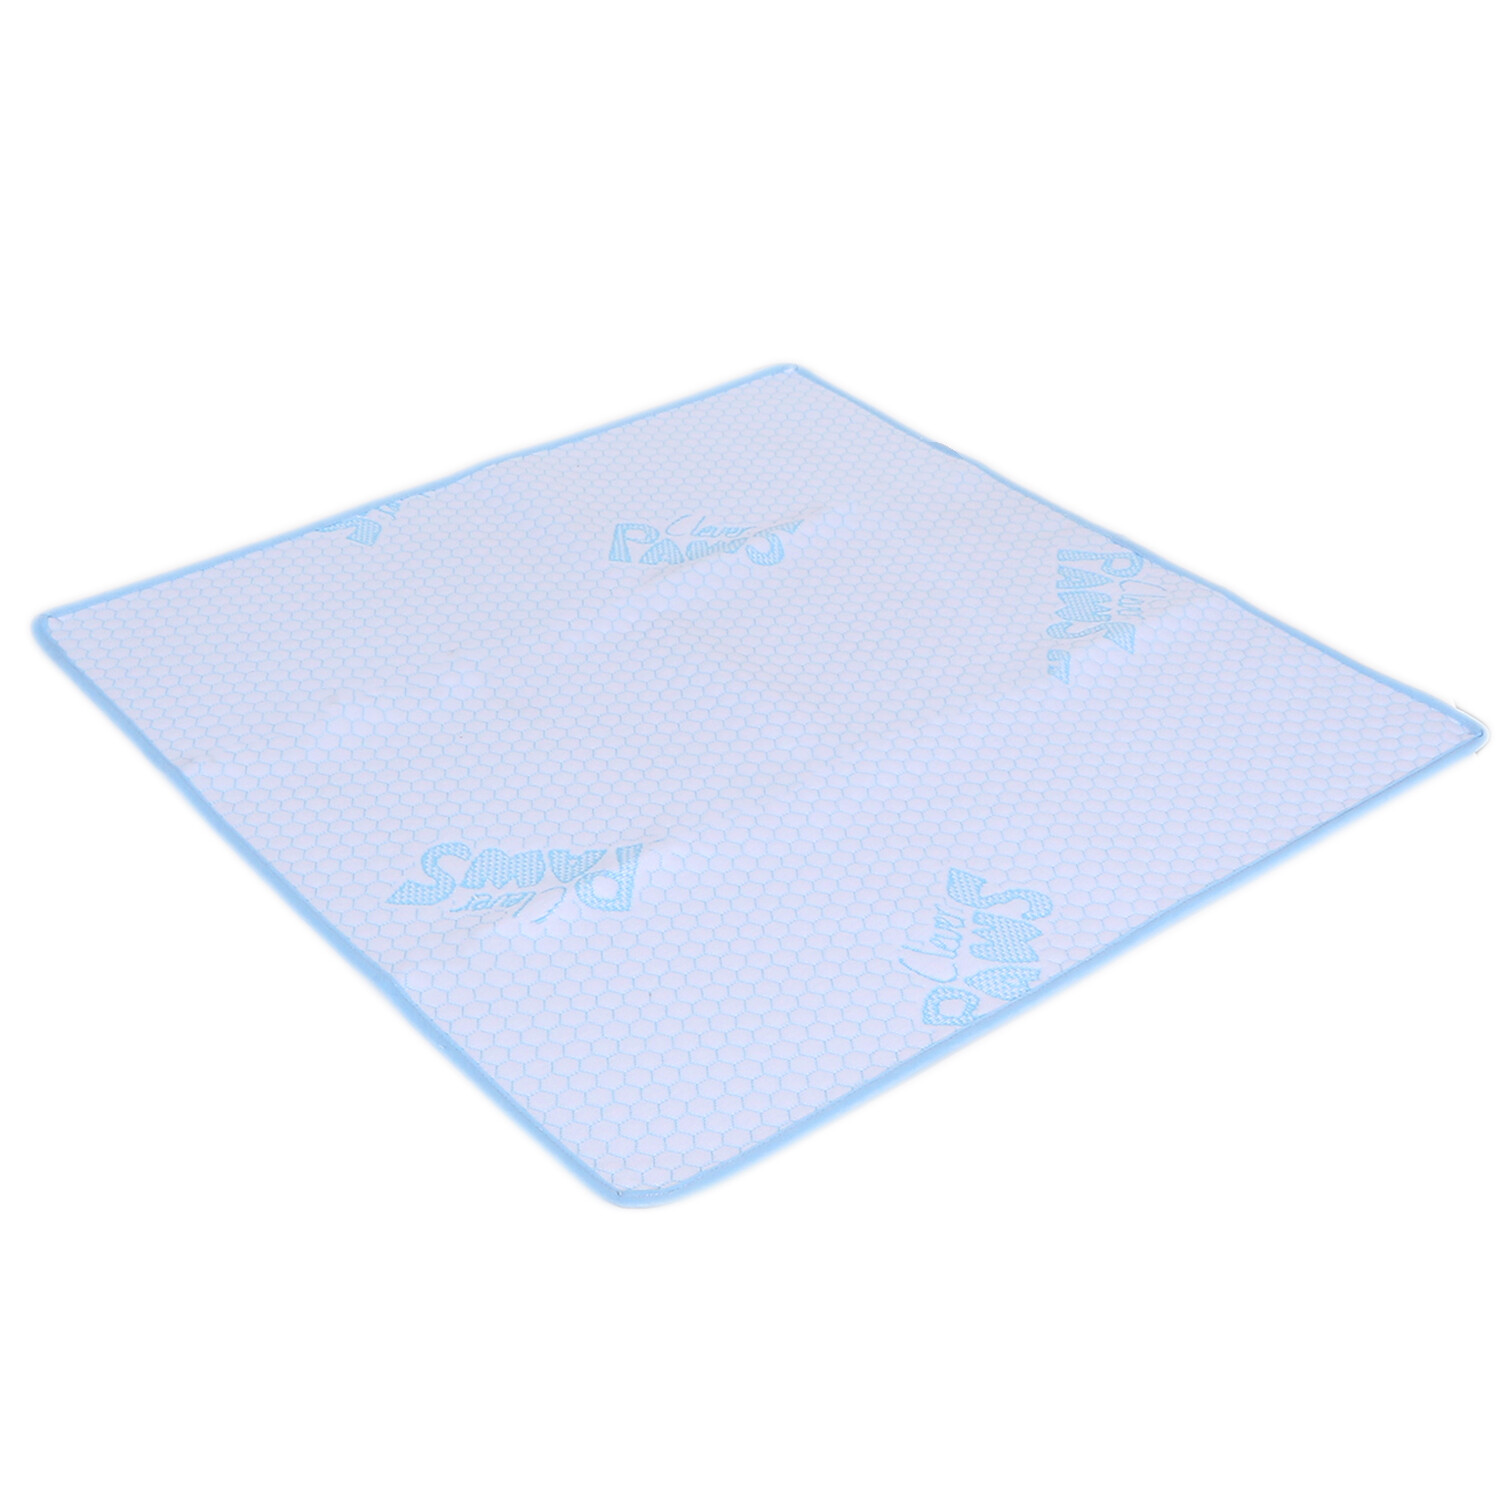 Clever Paws Washable Puppy Training Pads 3 Pack Image 2